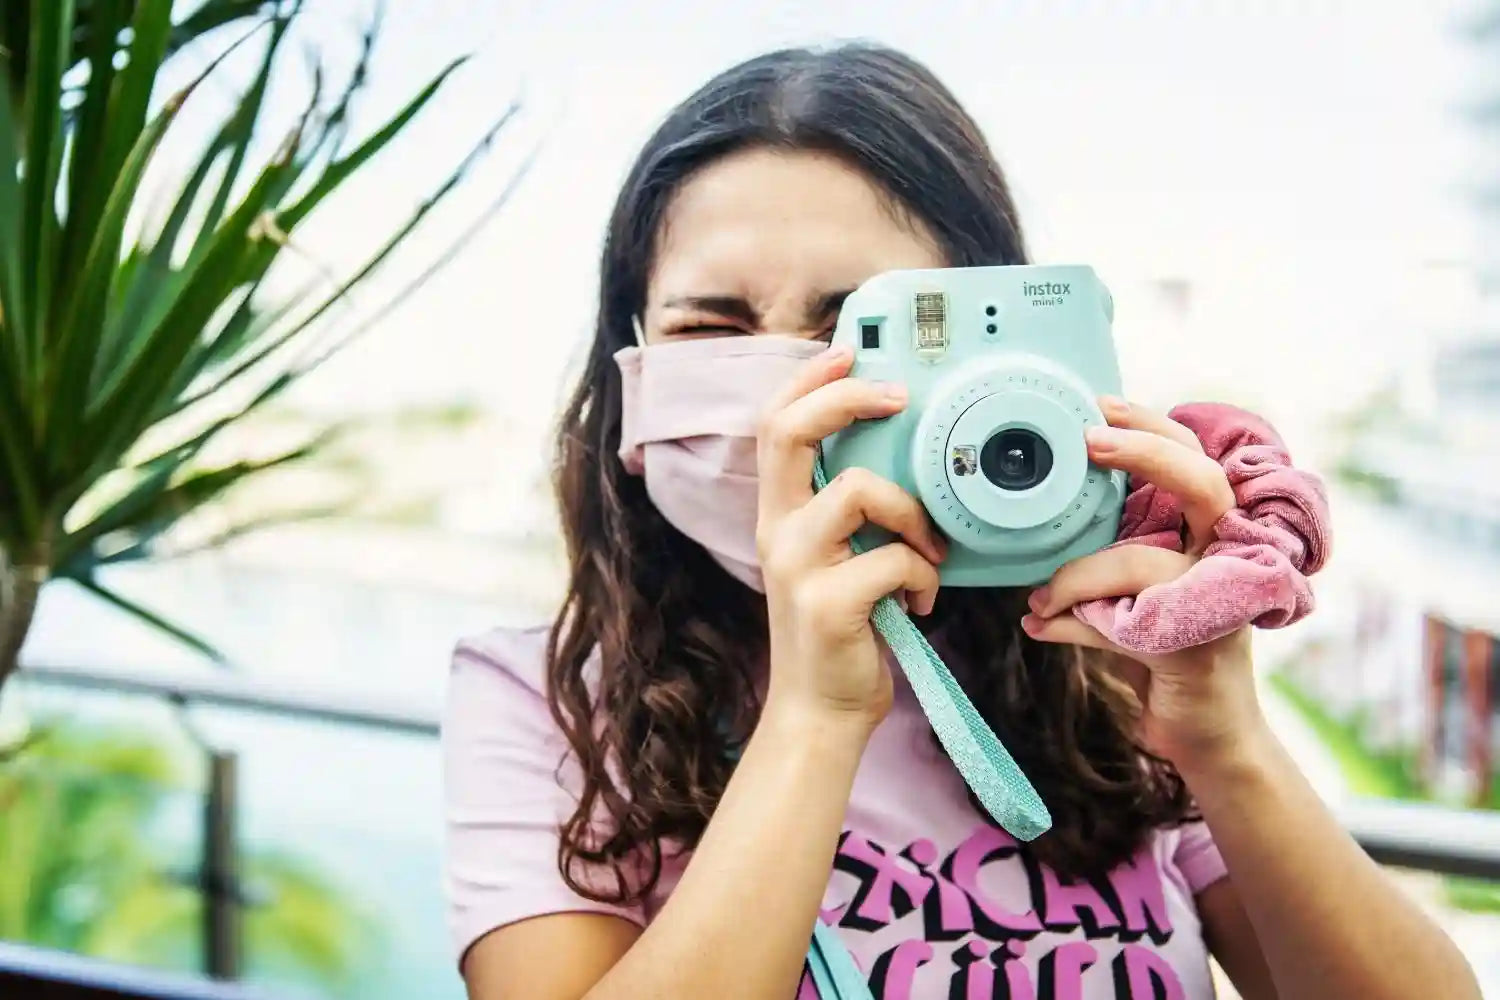 A Complete User-Guide to Instax Mini 9